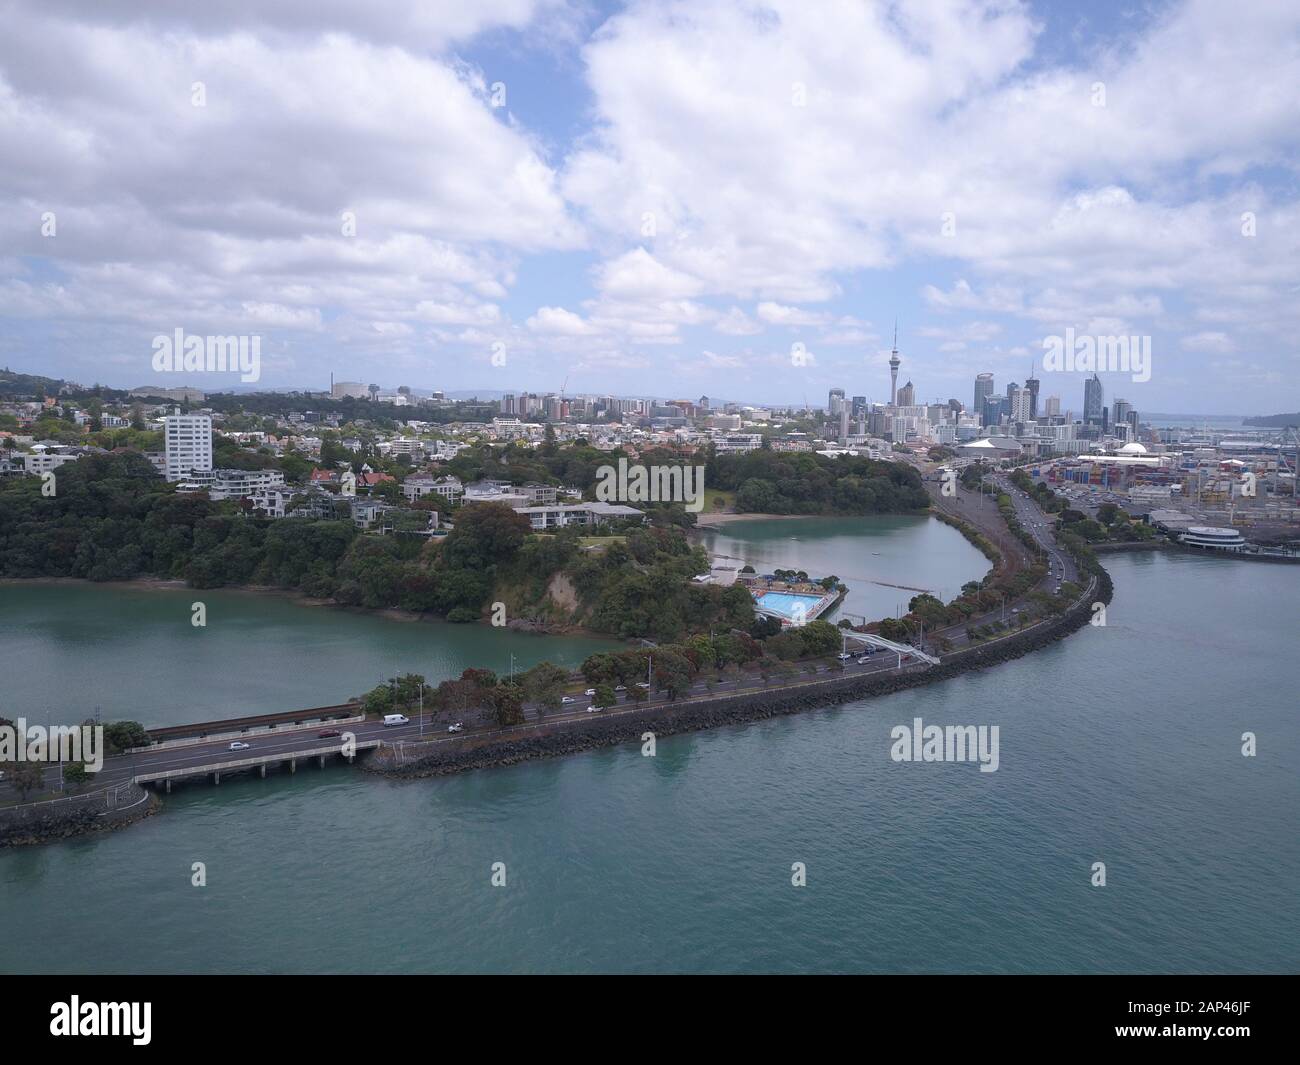 Viaduct Harbour, Auckland / New Zealand - December 29, 2019: The Judges Bay, Okahu Bay and Hobson Bay along with the marina bays and boating clubs Stock Photo